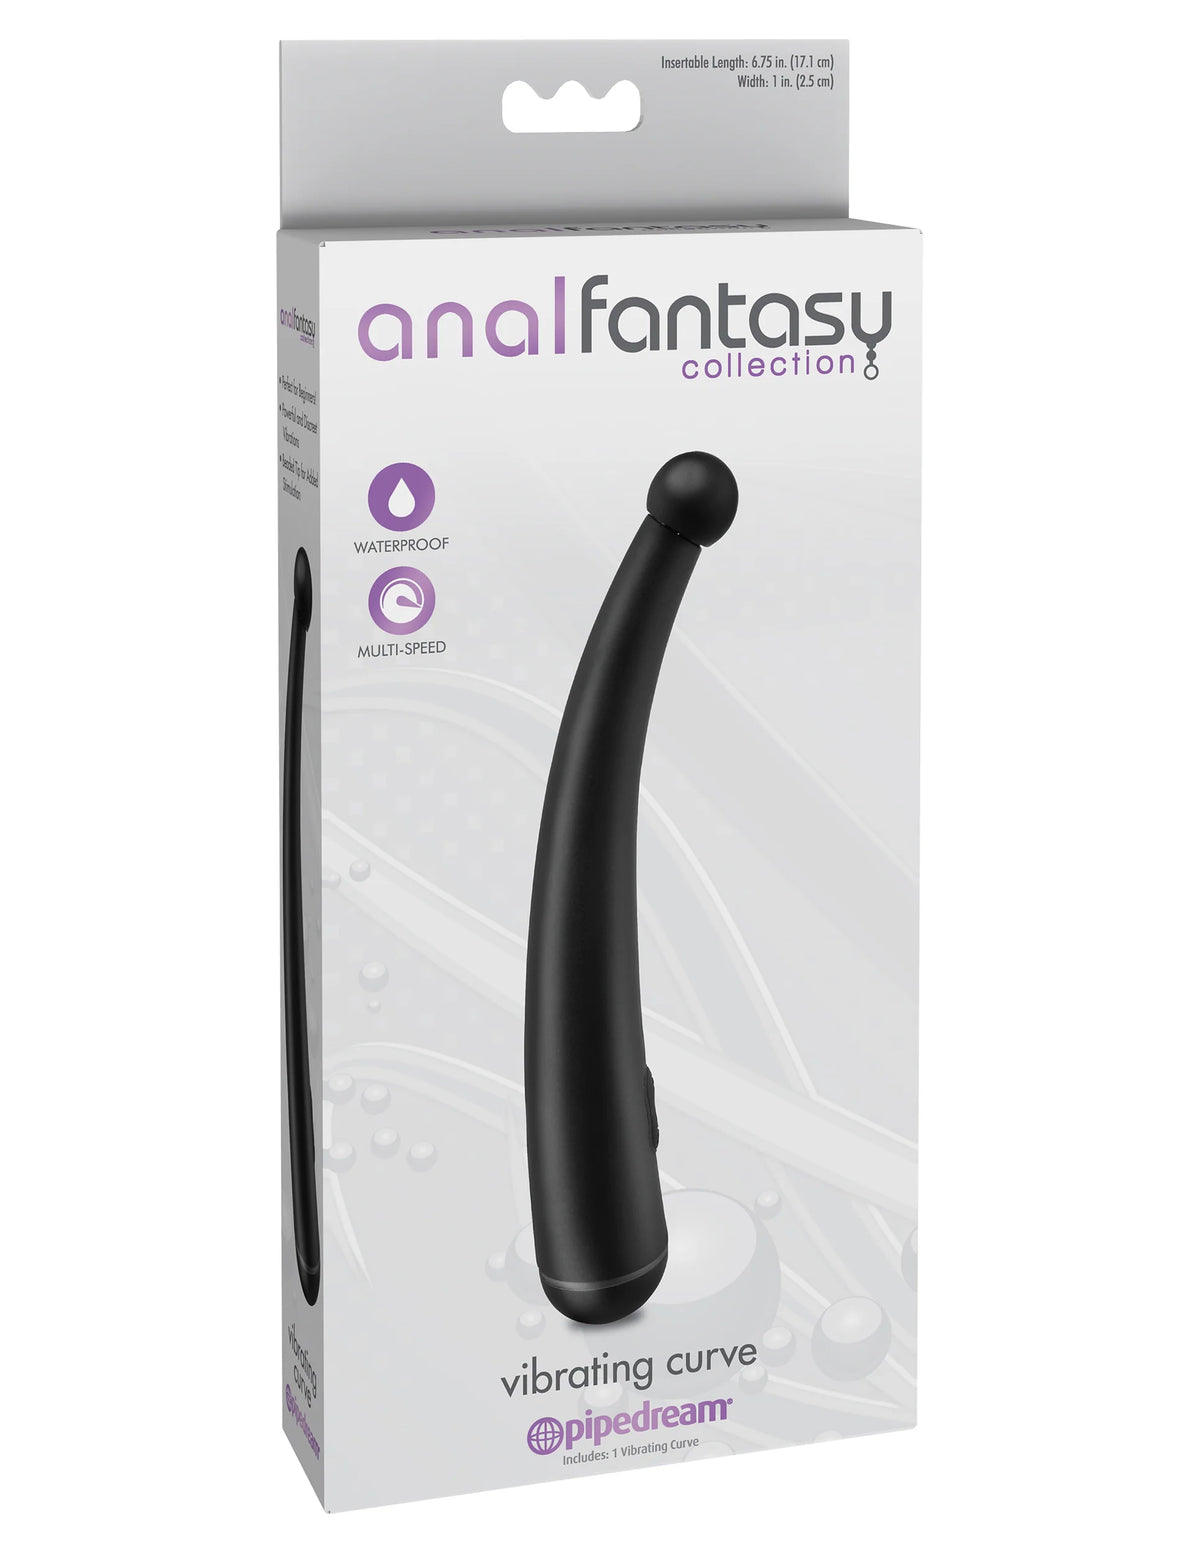 Anal Fantasy Collection - Vibrating Curve